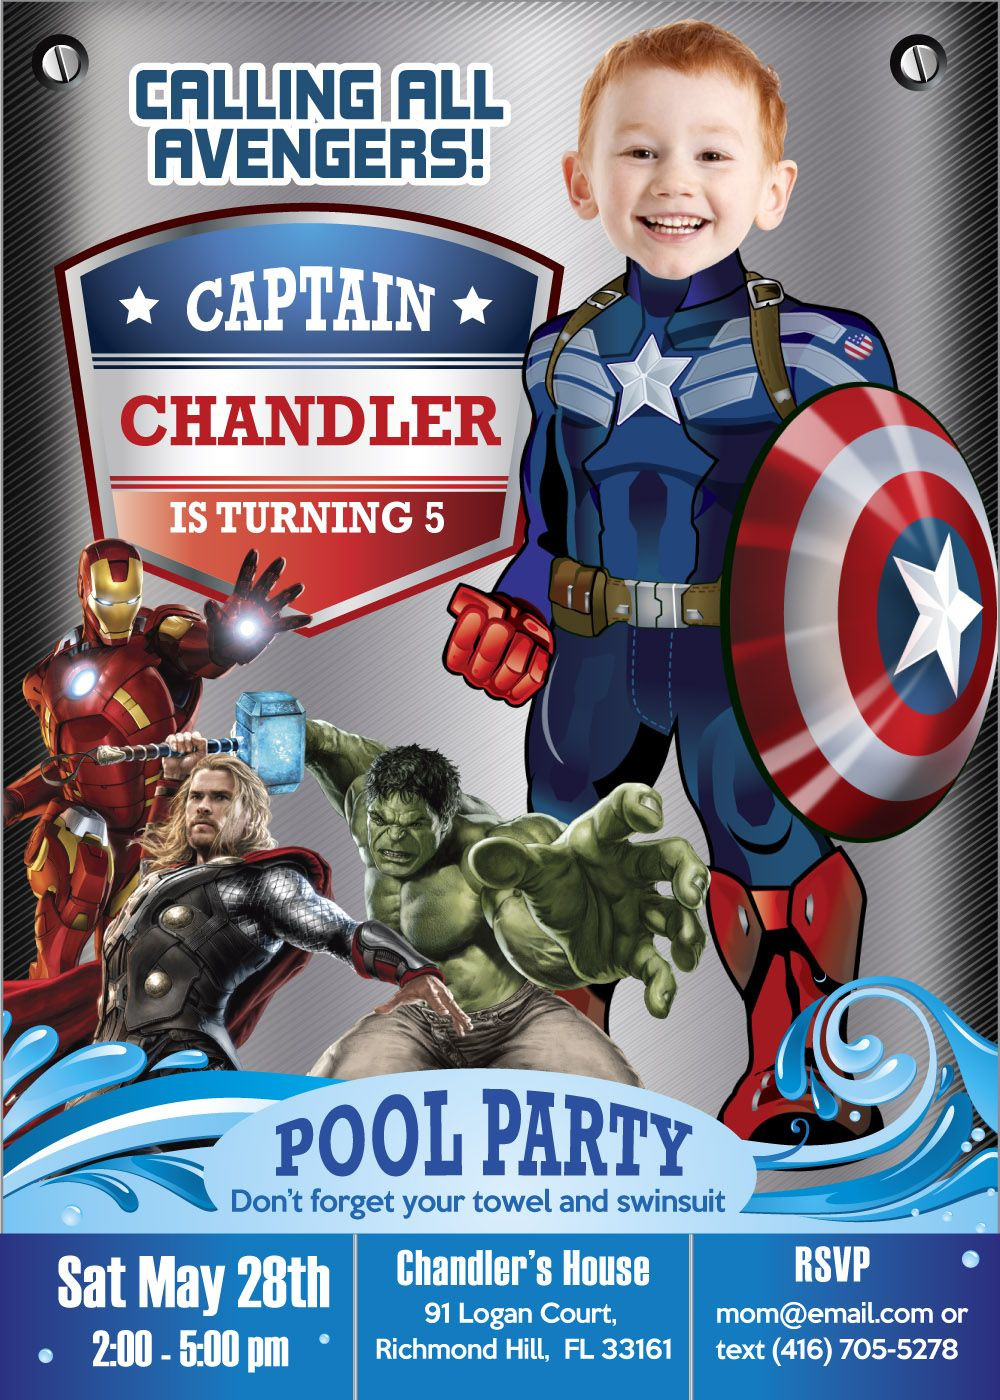 Personalized Avengers Birthday Invitations
 Captain America Pool Party Invite Pool party Avengers